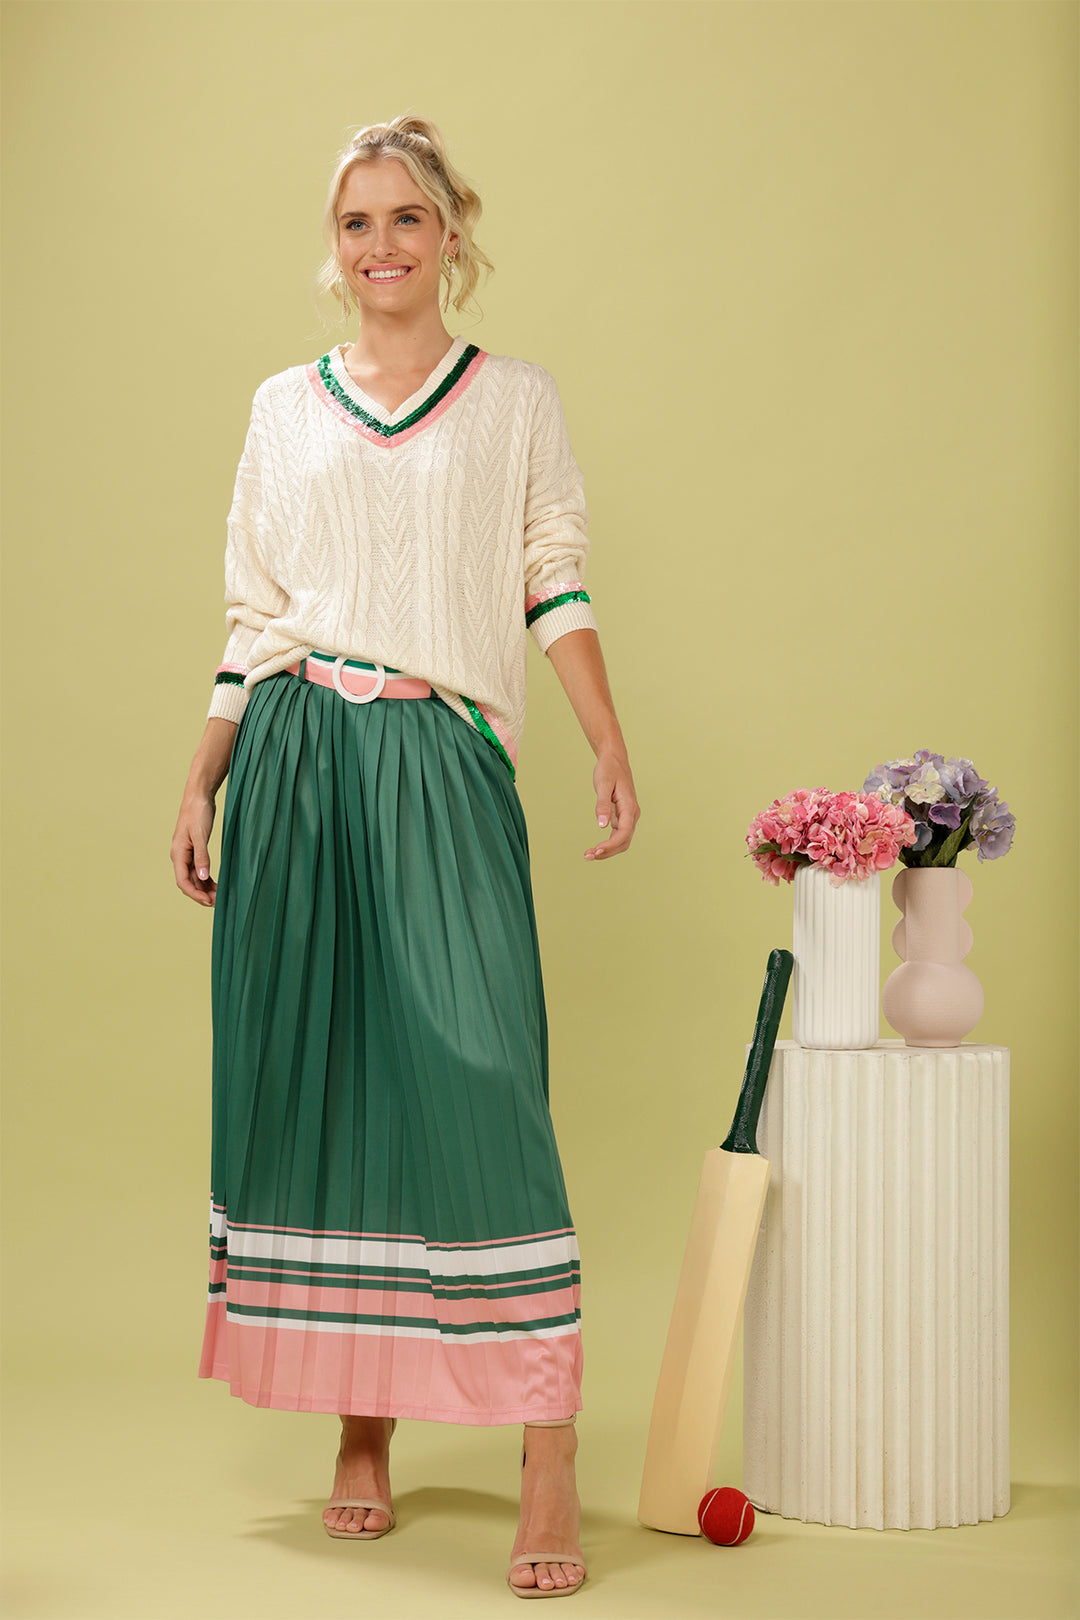 The Meet Me At The Club Pleated Skirt